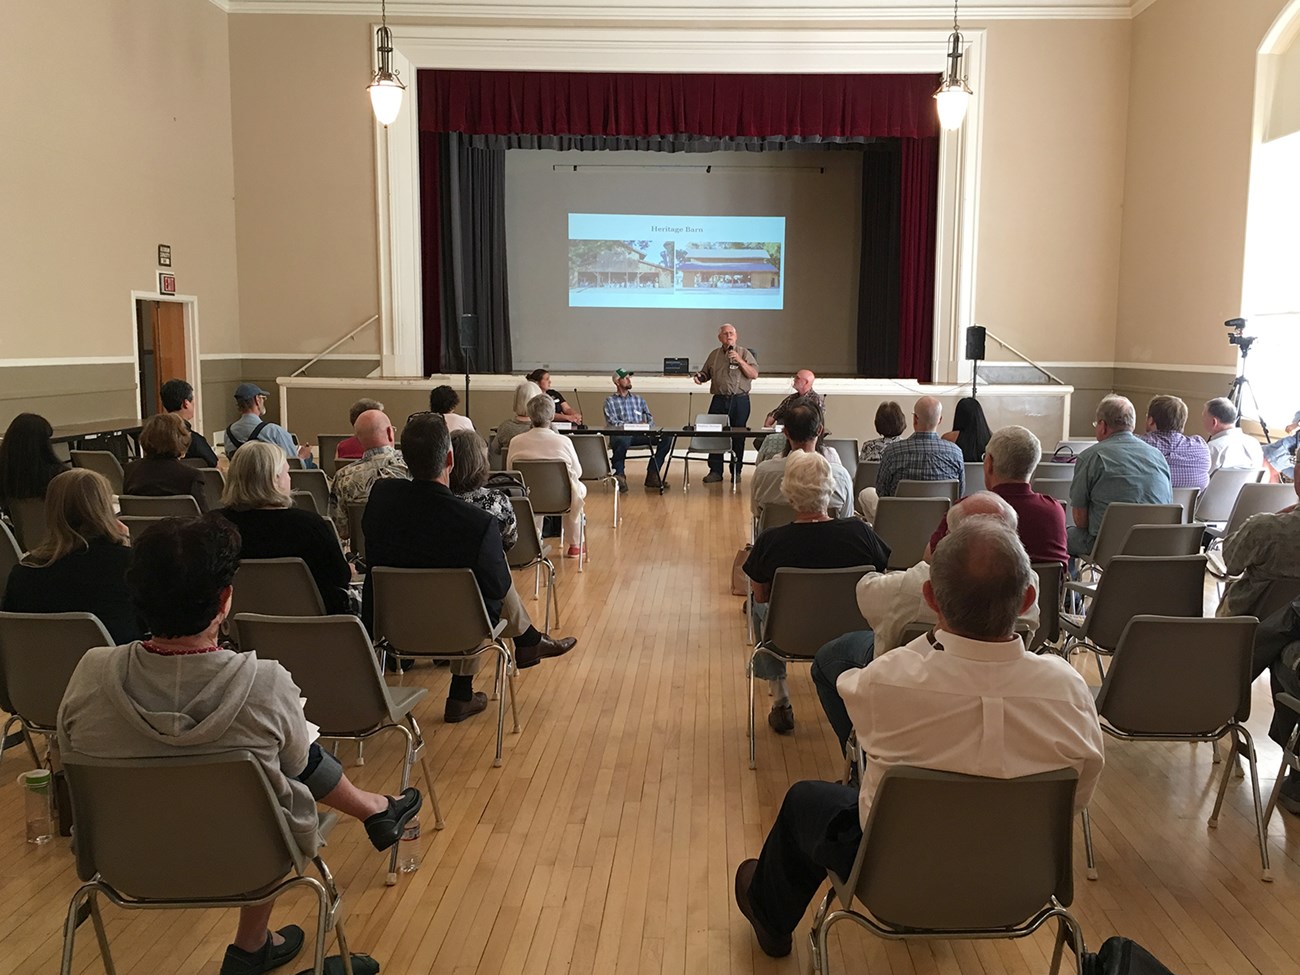 Attendees of the Delta Heritage Forum 2019 view a presentation